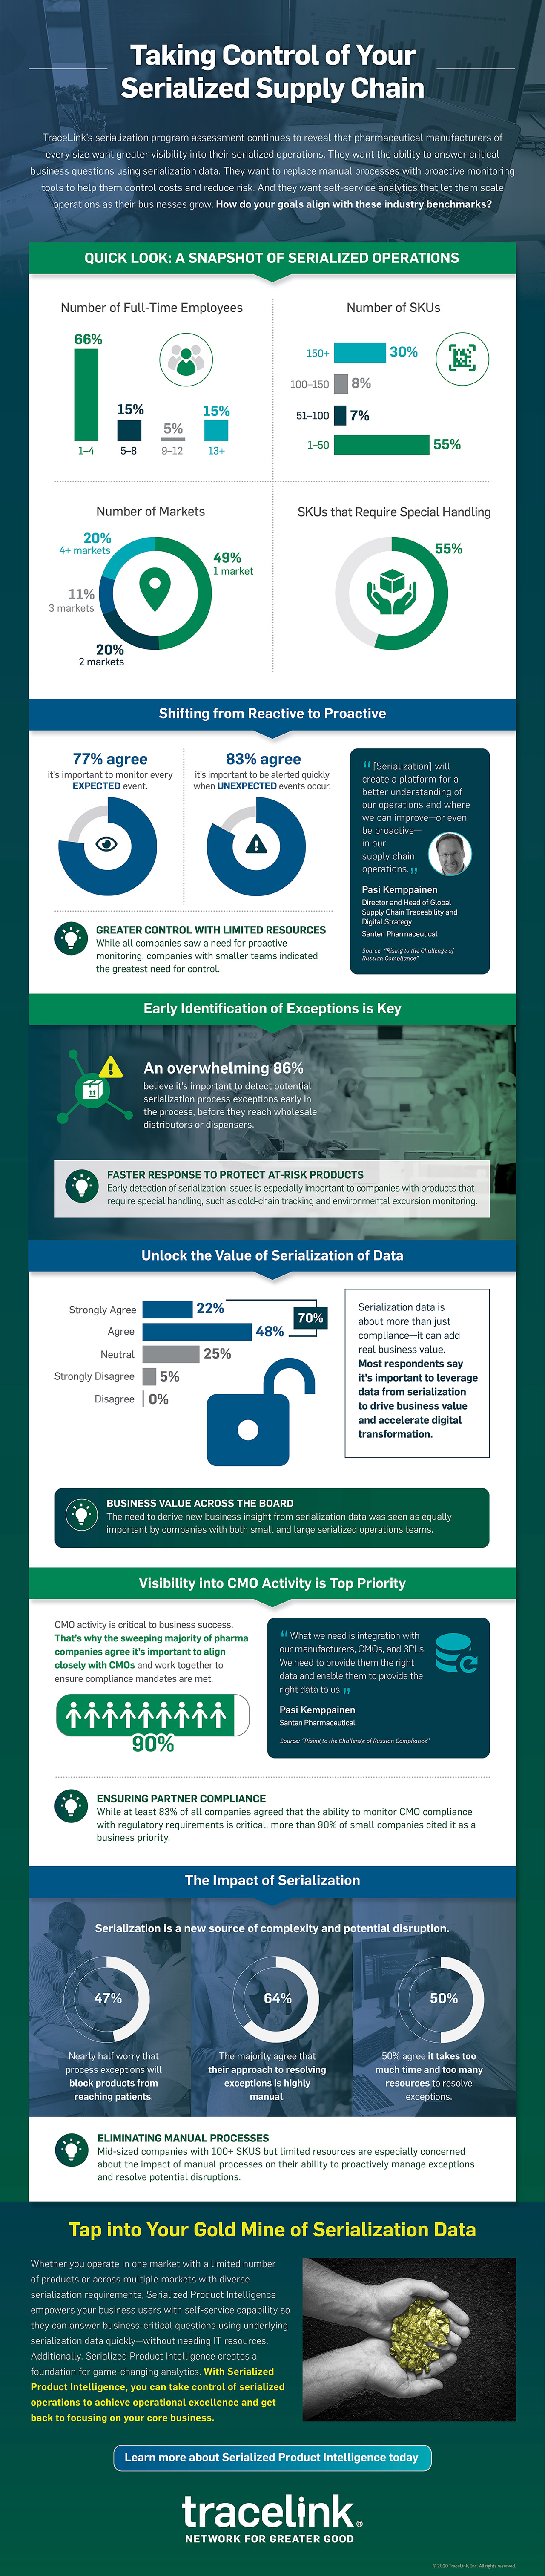 Infographic Serialized Operations Challenges and Opportunities